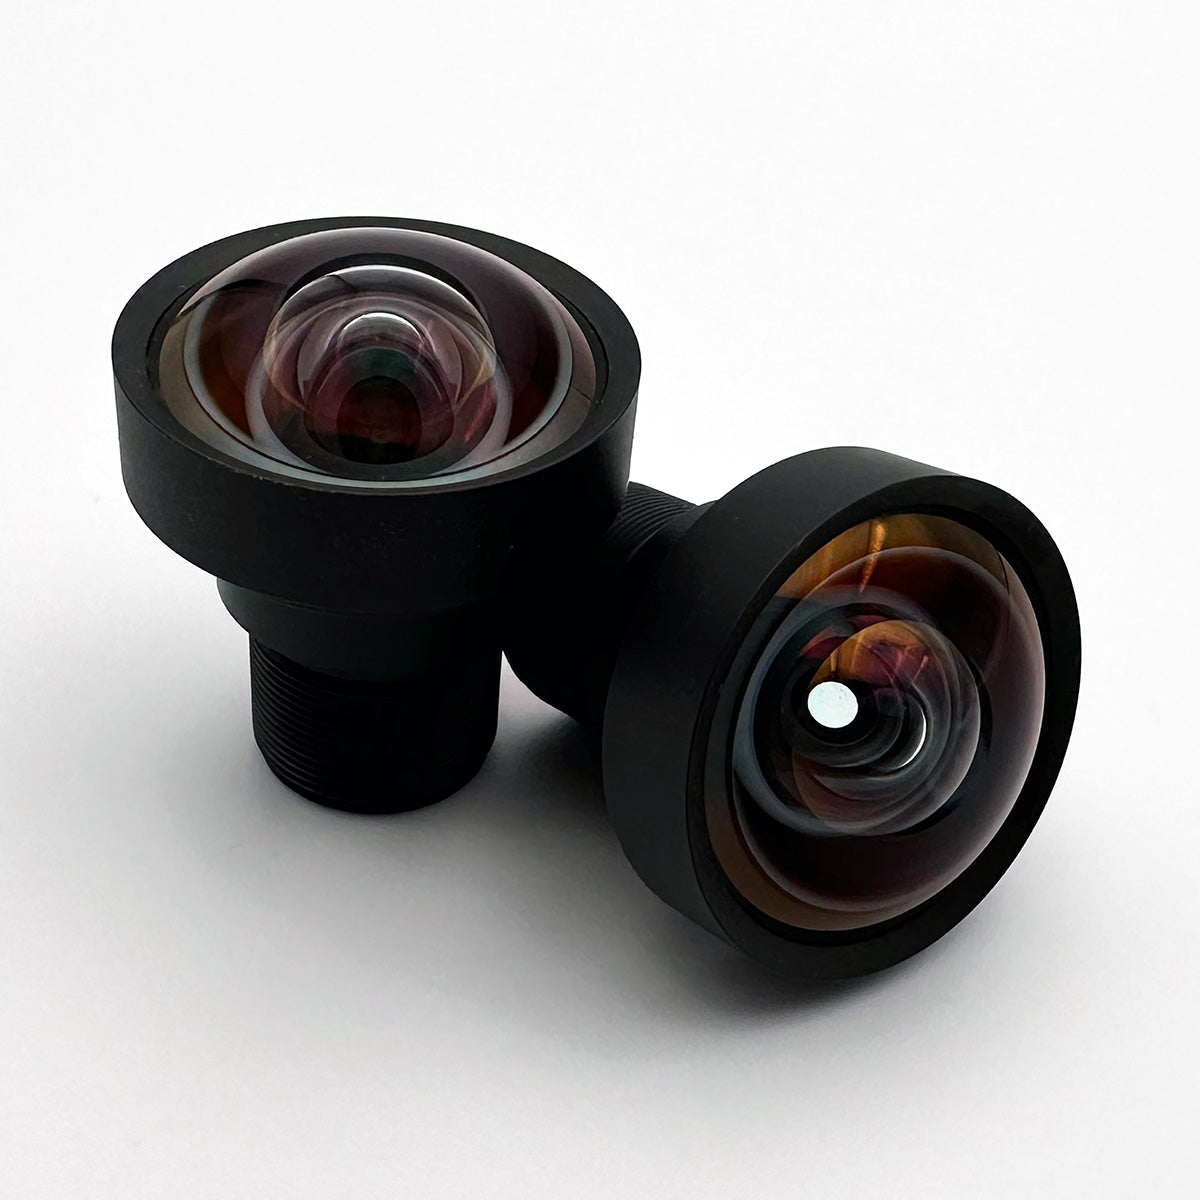 Low-Light HD USB Camera with Wide-Angle, Low Distortion Lens